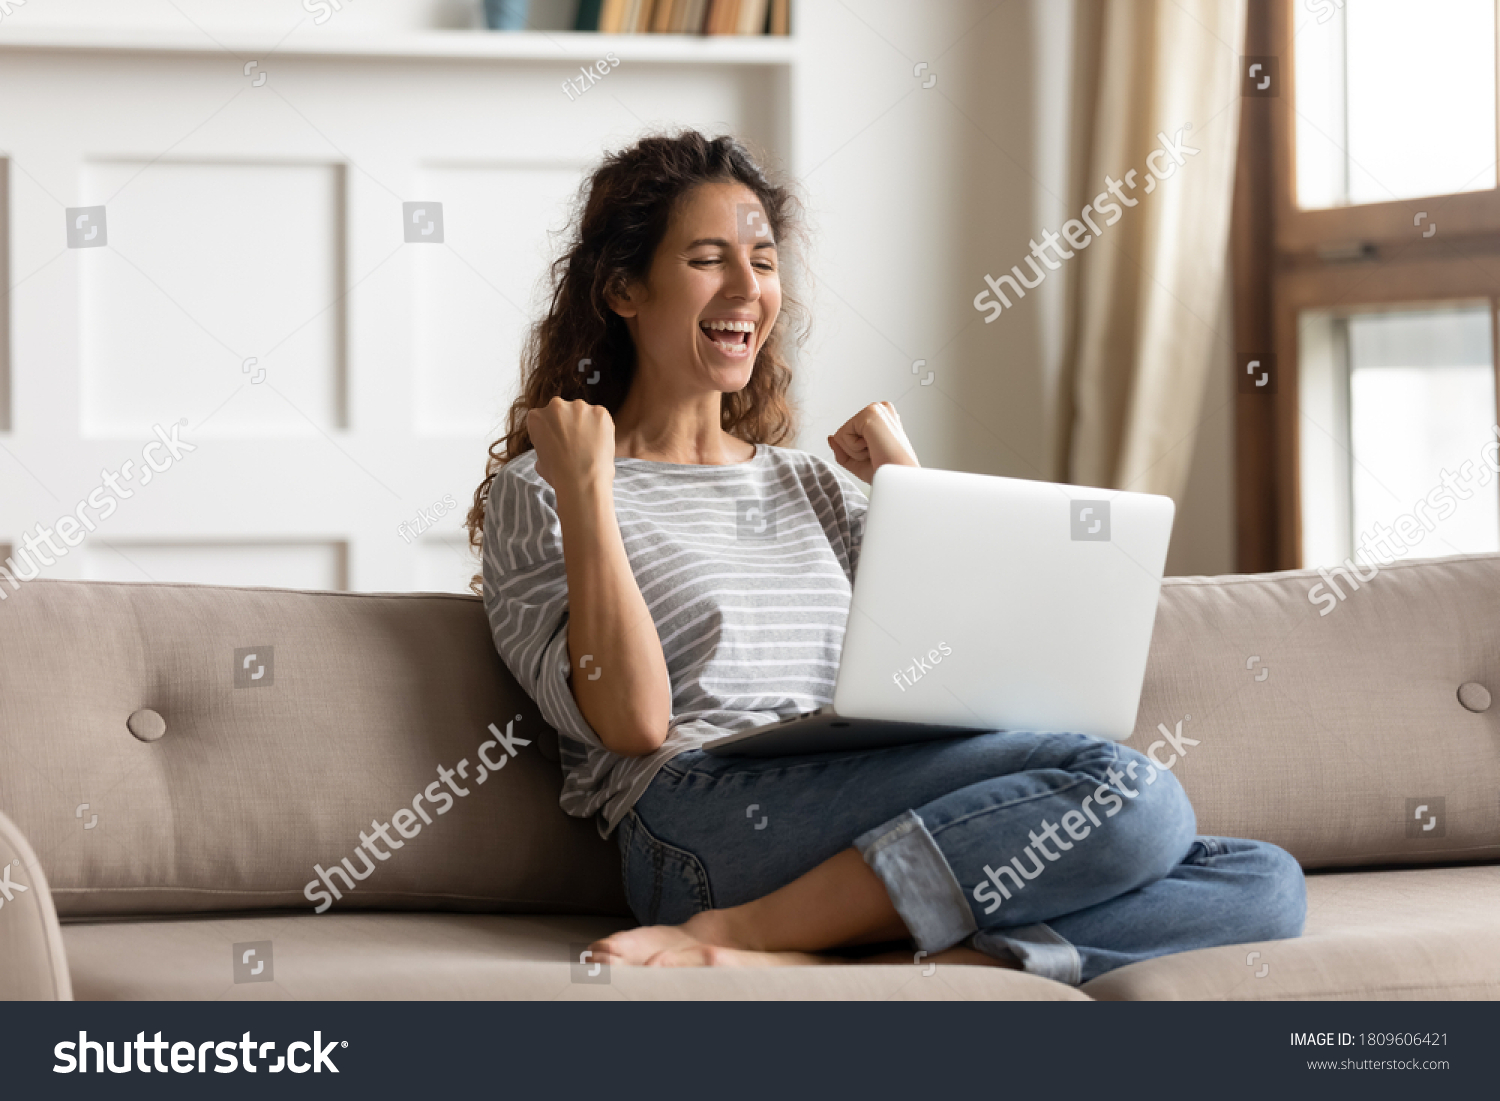 Woman sit on sofa put pc on lap clenched fists scream with joy while read great news on laptop. Gambler celebrate online auction bet victory. Got incredible offer sincere emotions of happiness concept #1809606421